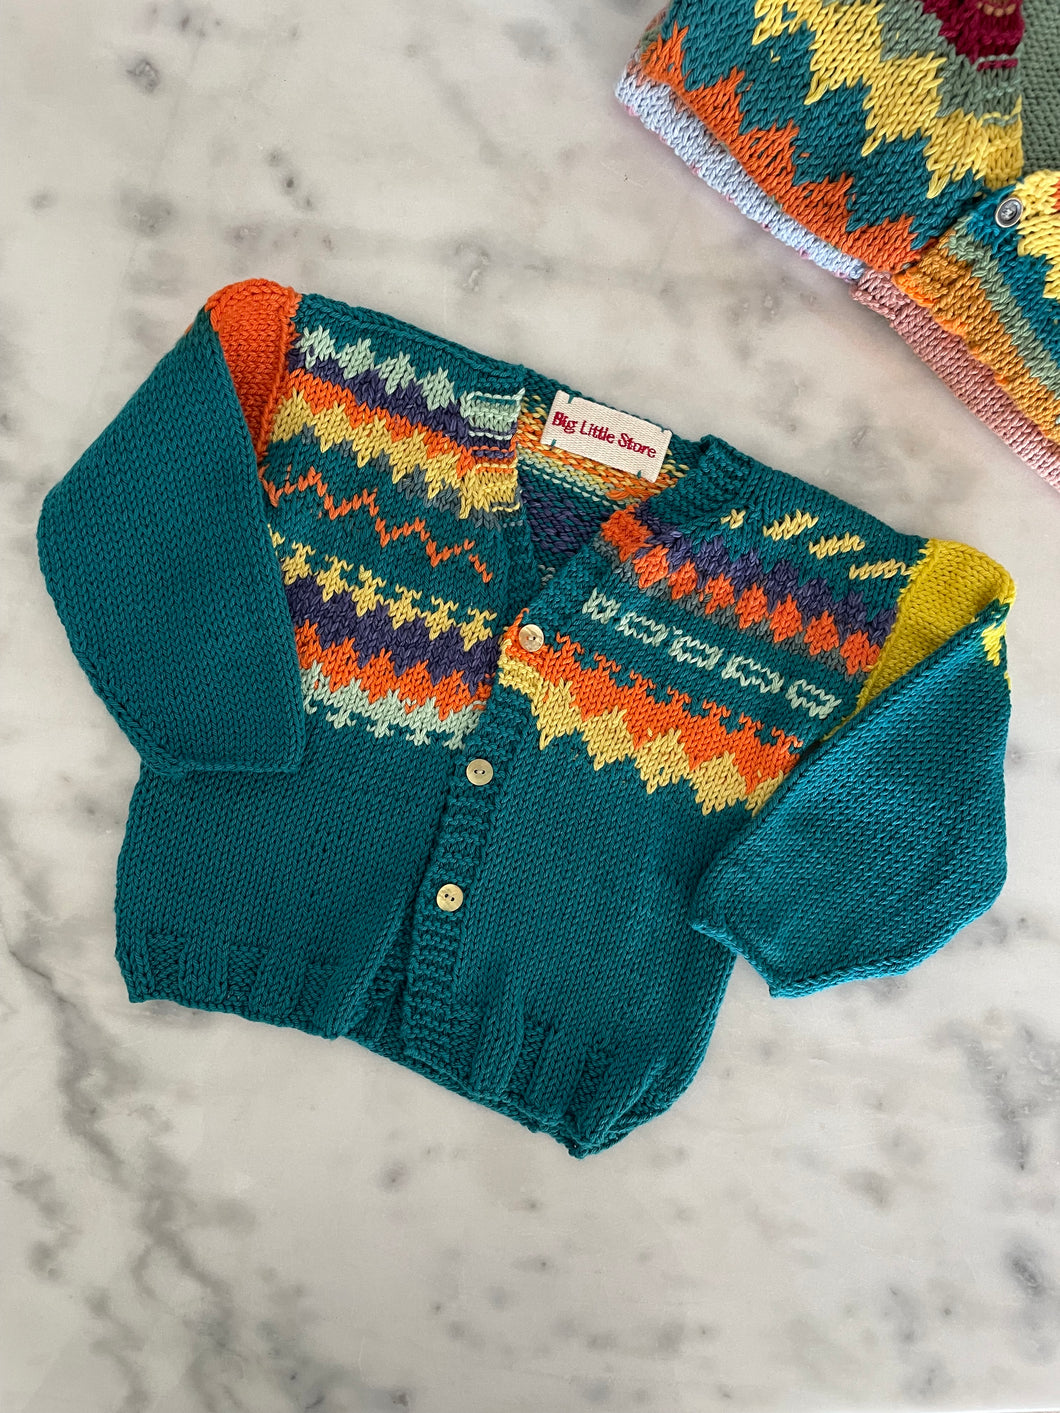 Autumn Love Hand-knitted Cardigan #54